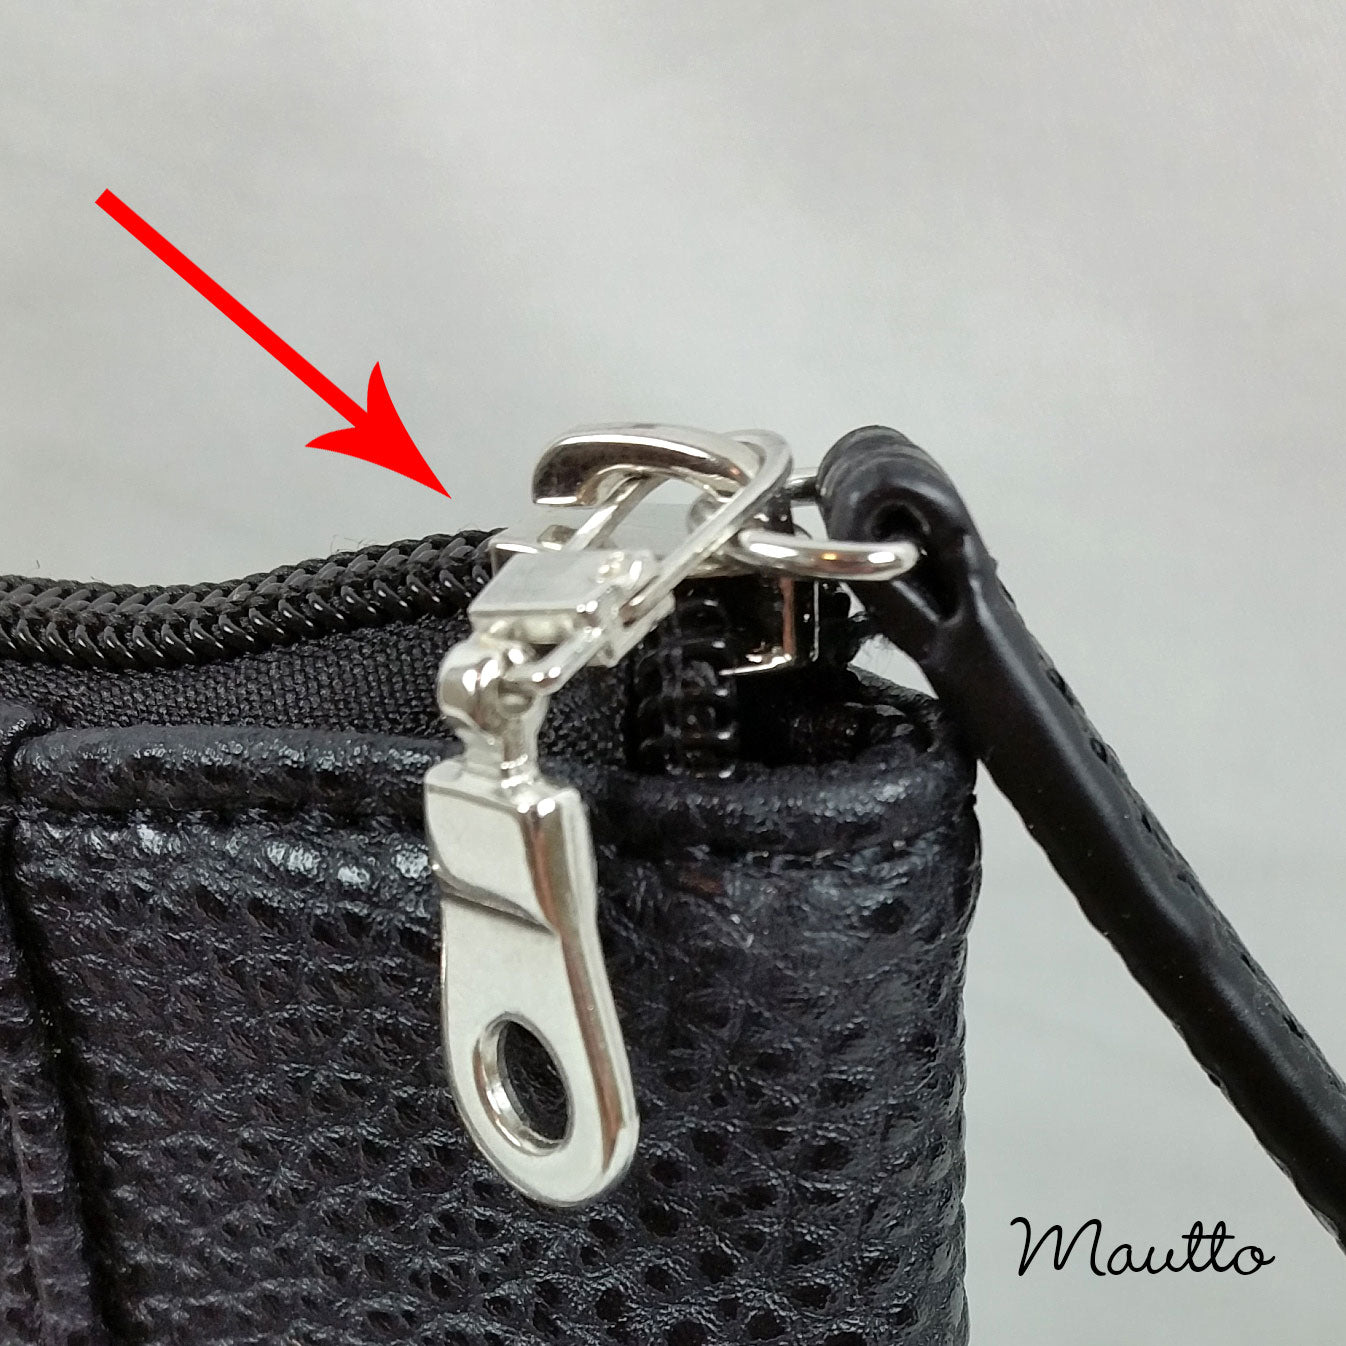 Zipper Pull (Pull-tab) Replacement for Bags, Apparel, Sleeping Bags – Mautto